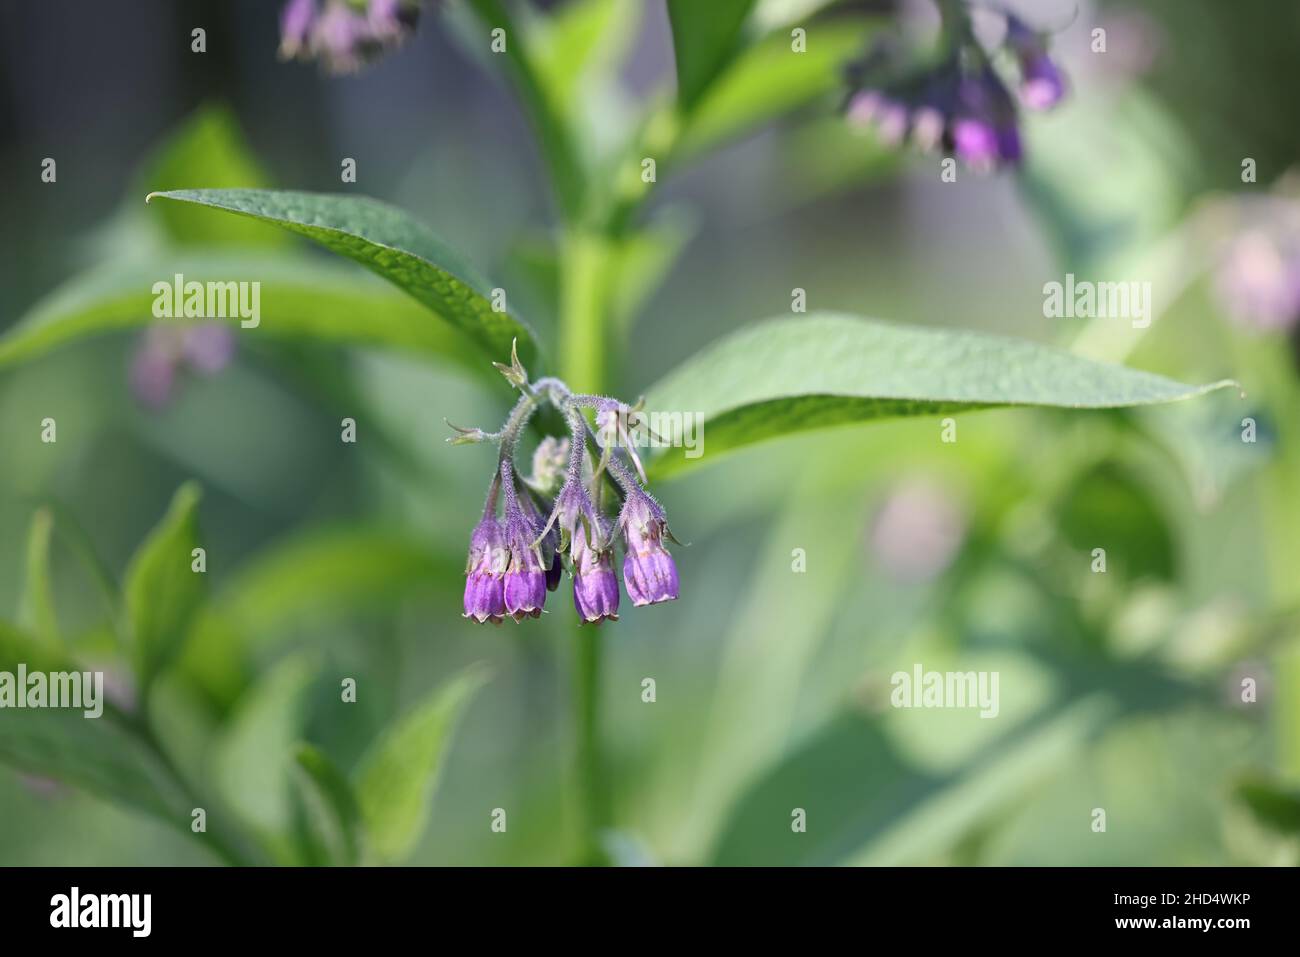 Symphytum officinale, known as Common comfrey or Common comphrey, wild medicinal plant from Finland Stock Photo